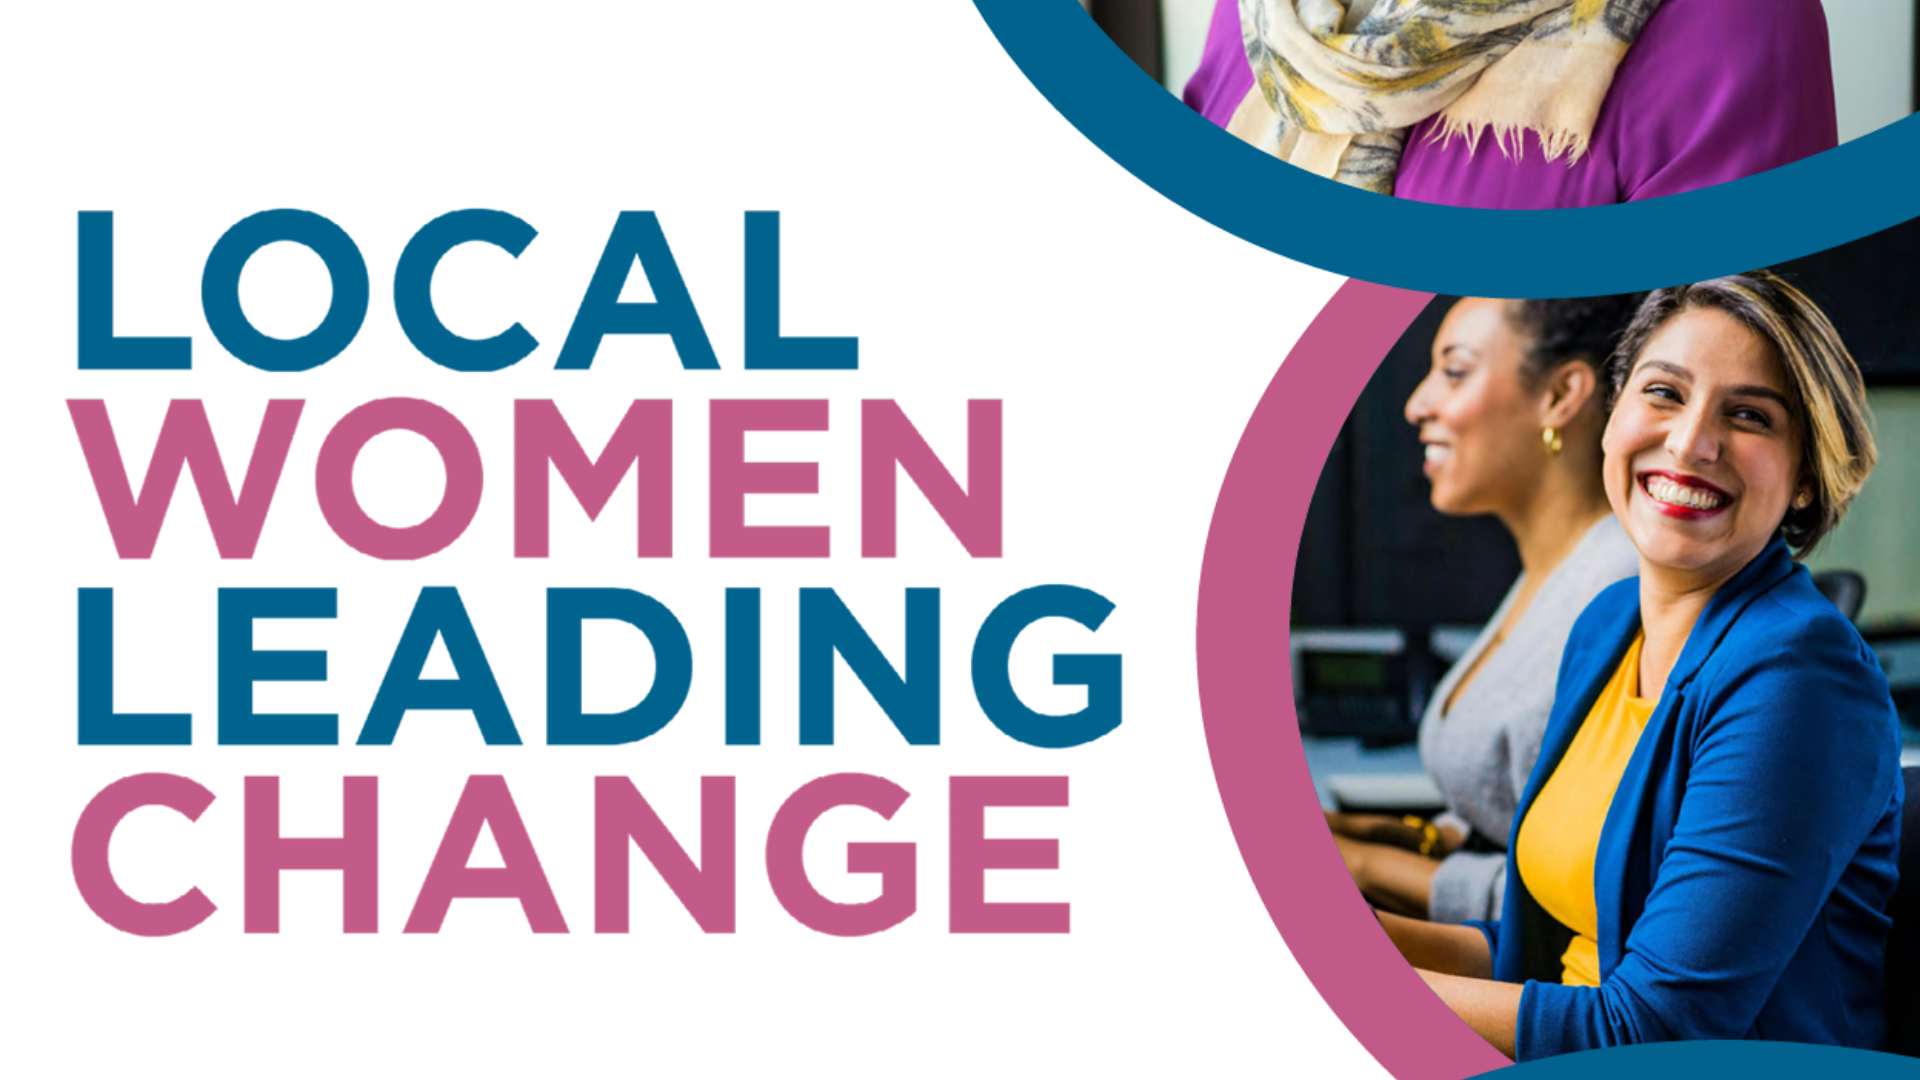 bold pink and blue text reads "Local women leading change".